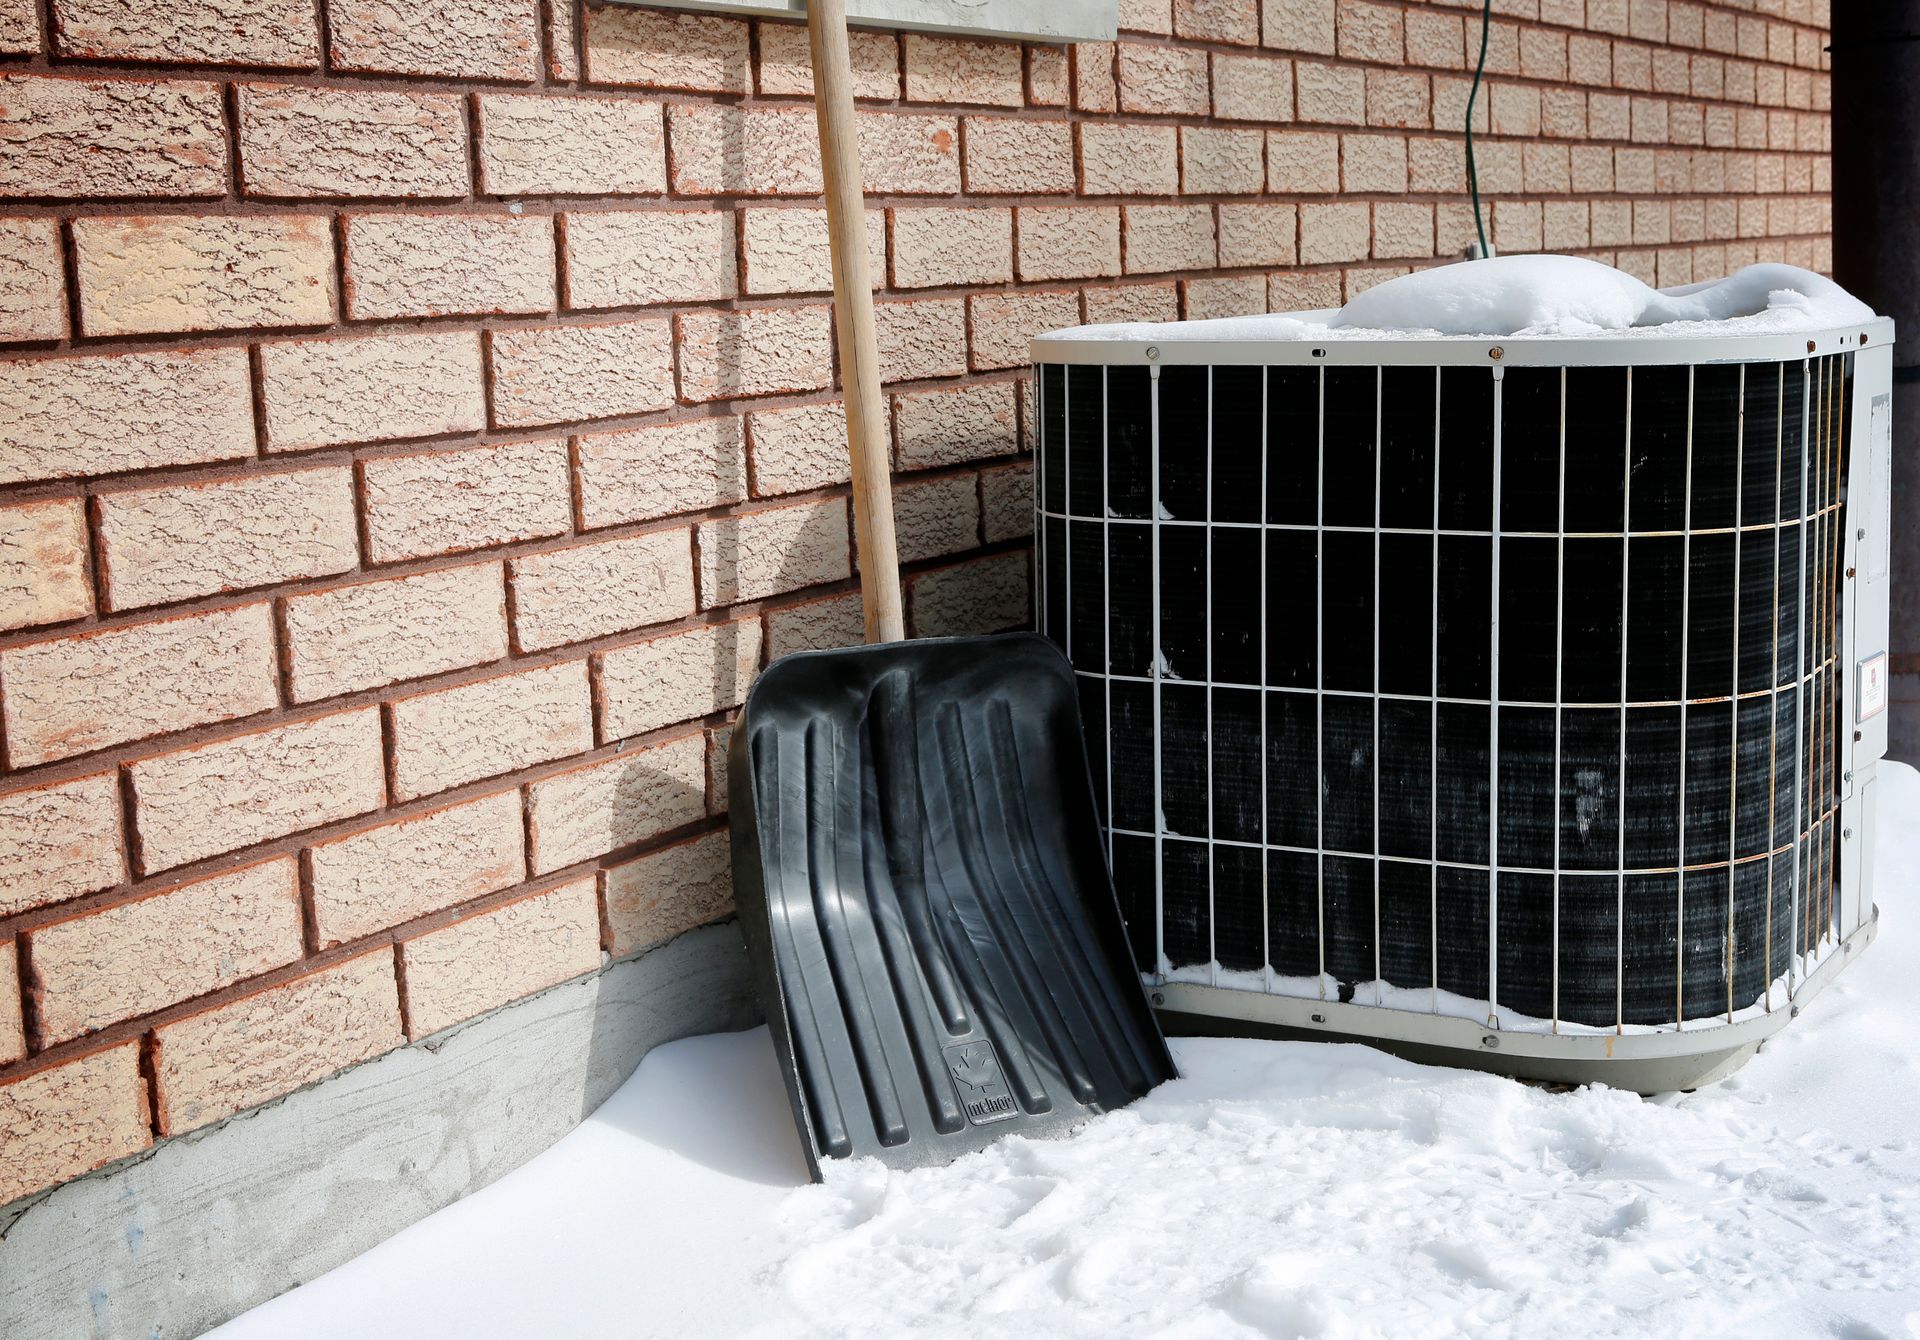 Snow covering and surrounding AC unit outside with snow shuffle next to it.